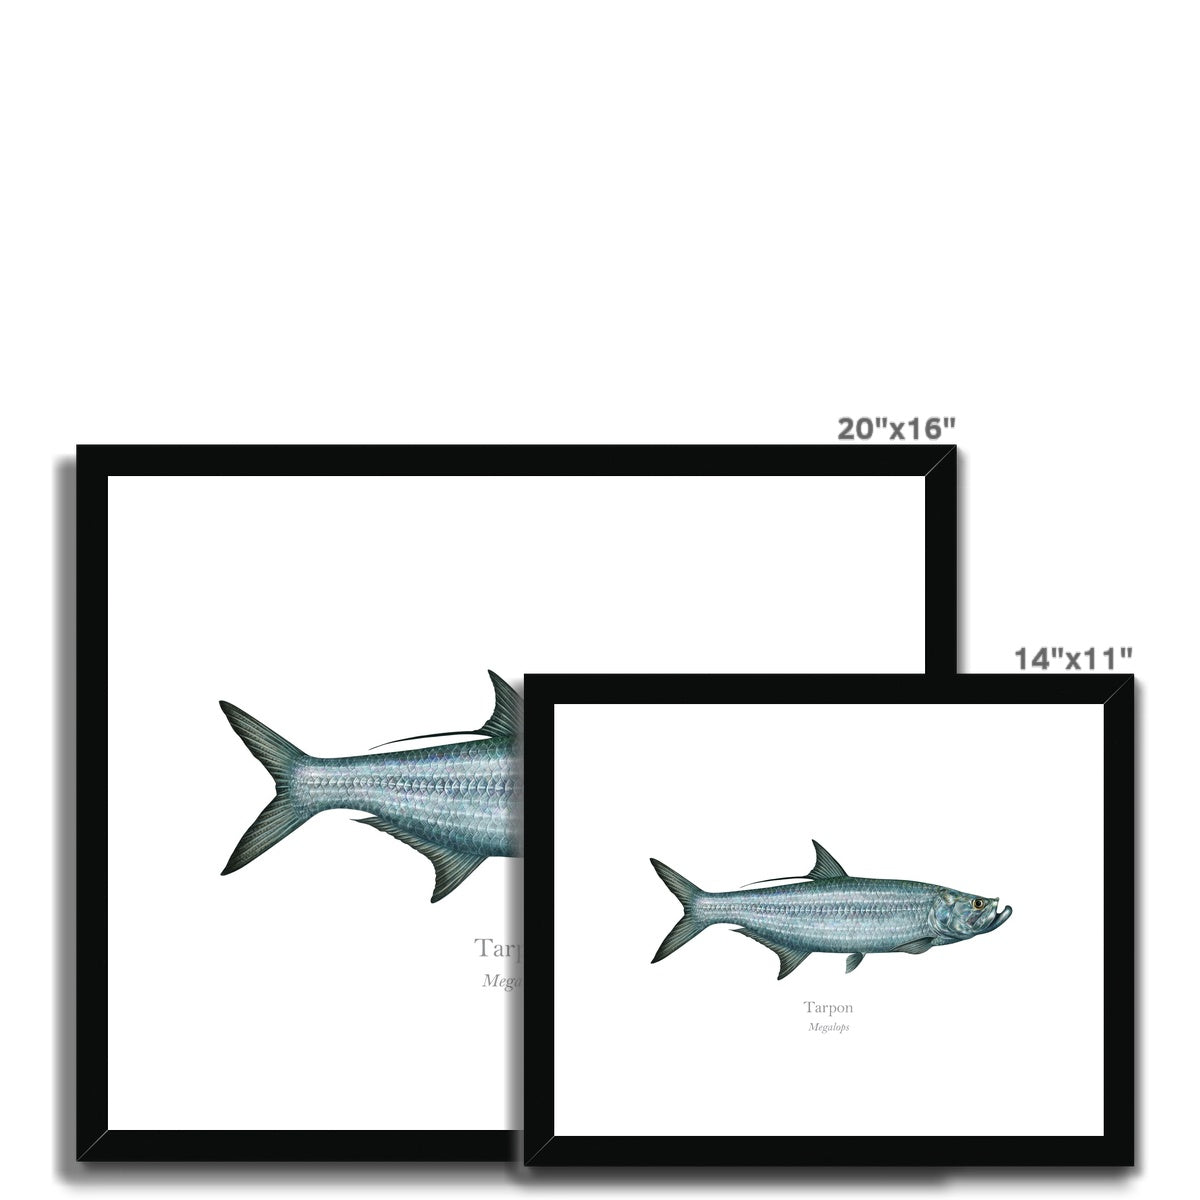 Tarpon - Framed & Mounted Print - With Scientific Name